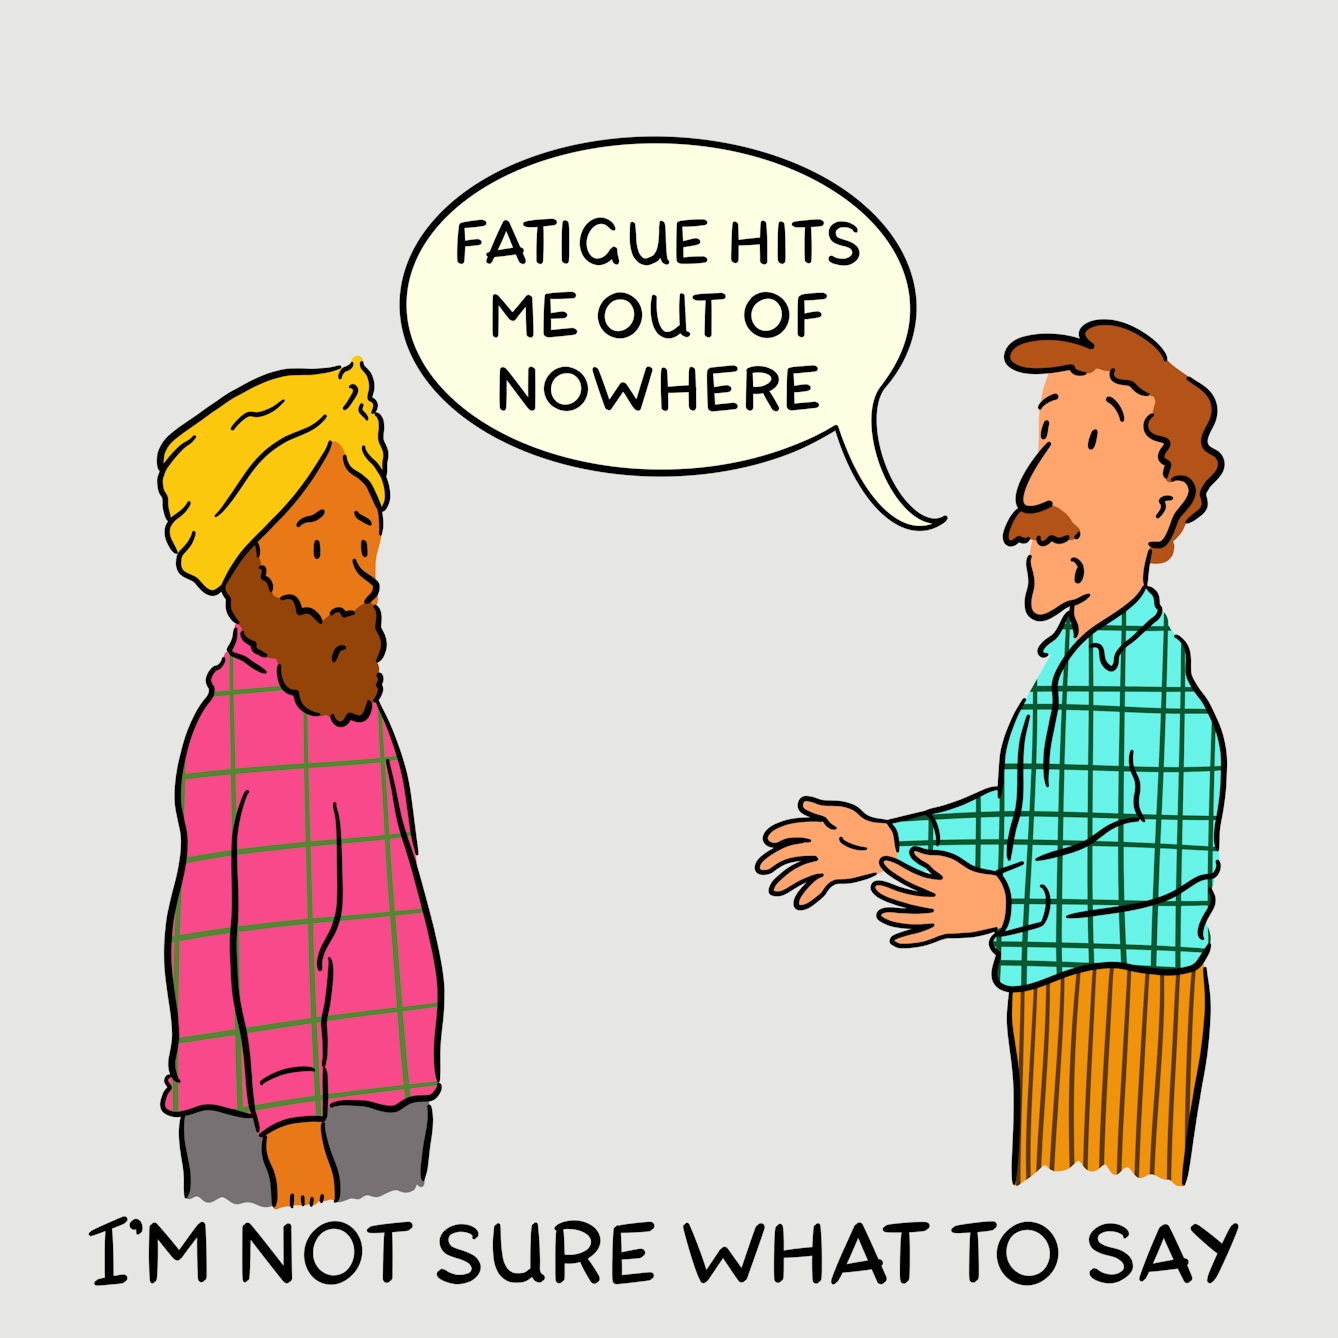 Panel 2 of a four-panel comic drawn digitally: a white man with a moustache in a plaid shirt says to a bemused man wearing a gold coloured turban "Fatigue hits me out of nowhere". The caption text reads "I'm not sure what to say"